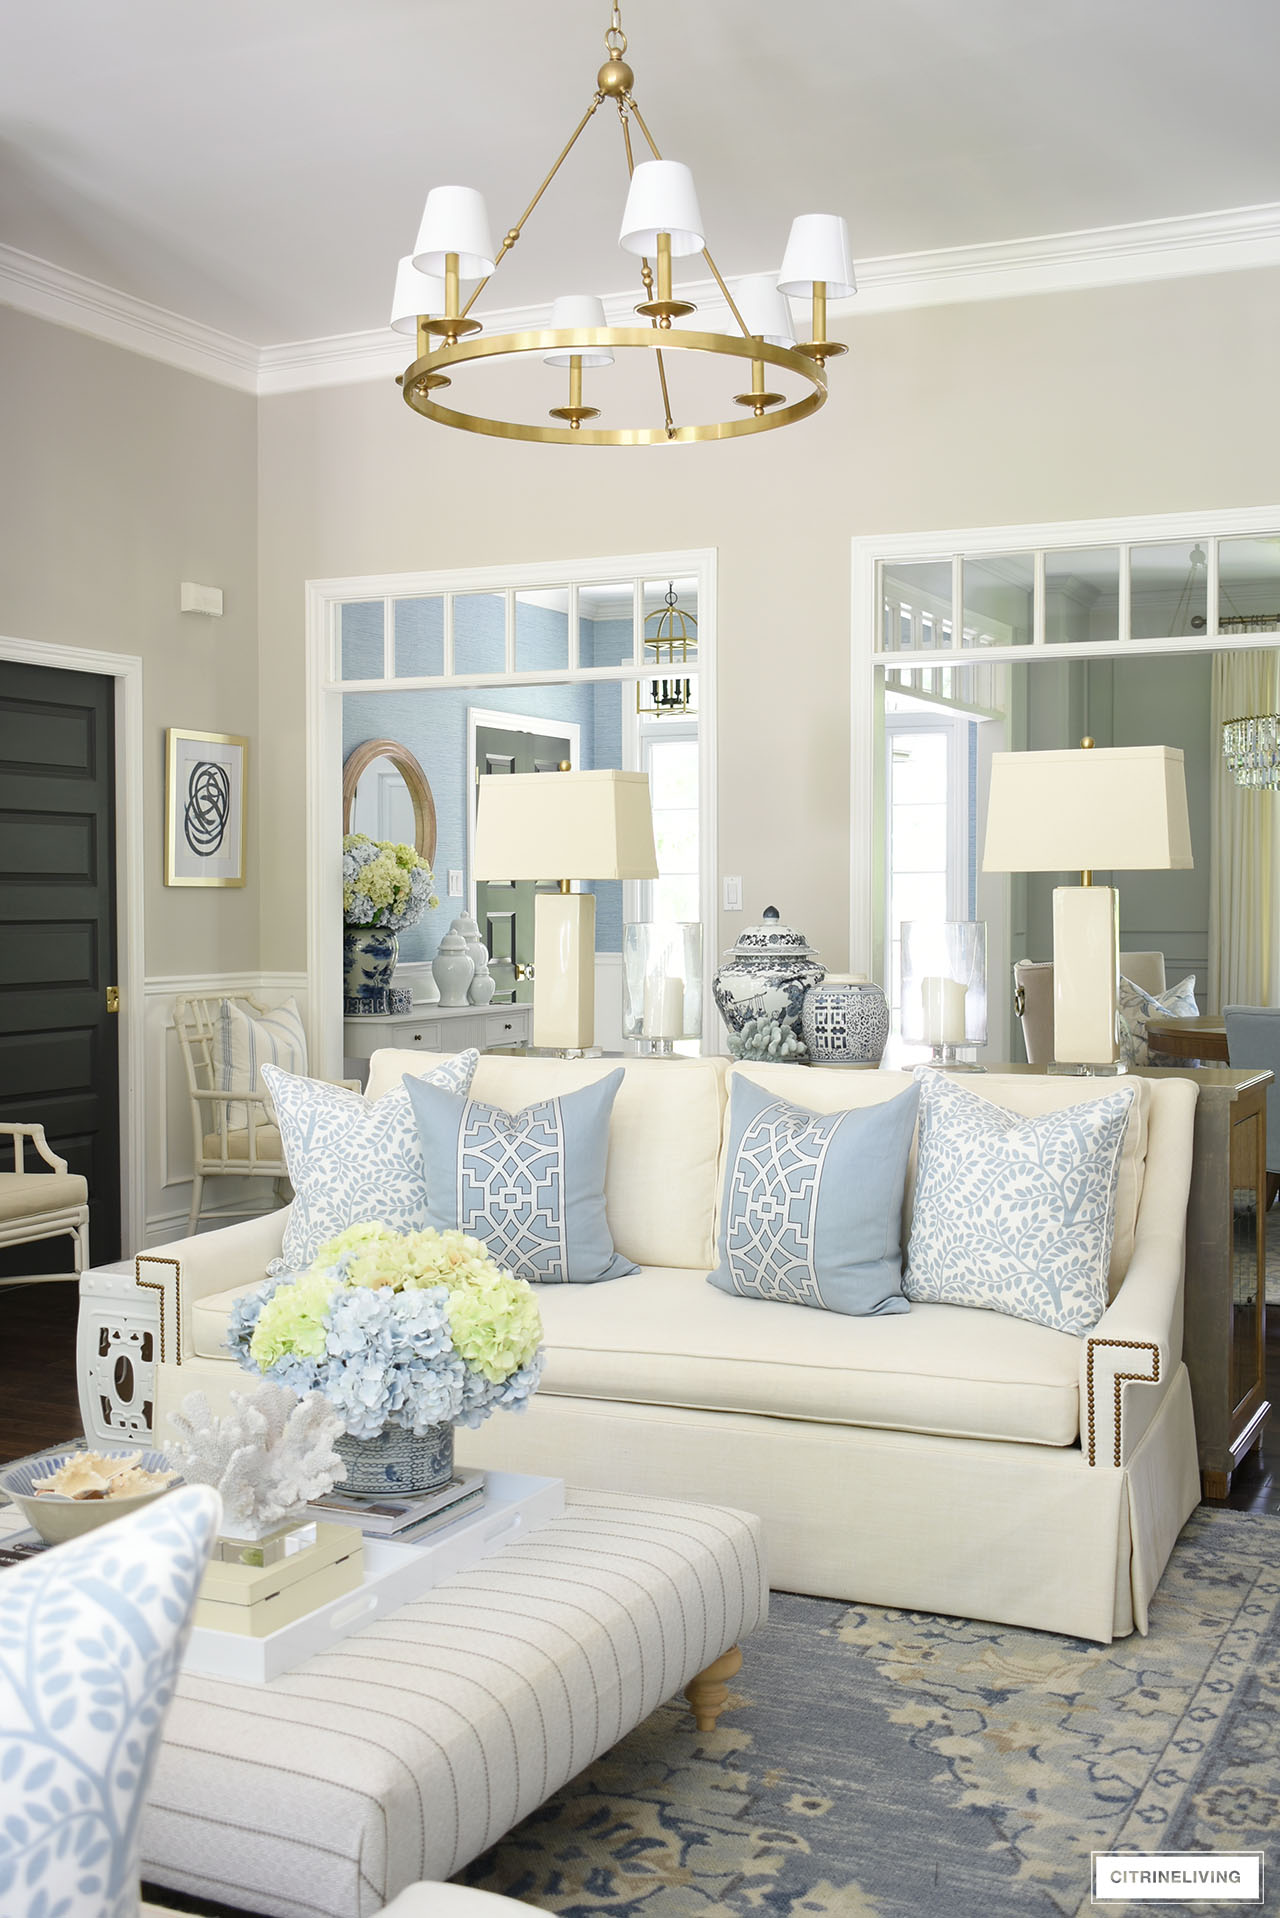 Living room sofa styled for summer with gorgeous designer pillows in soft blue and white.